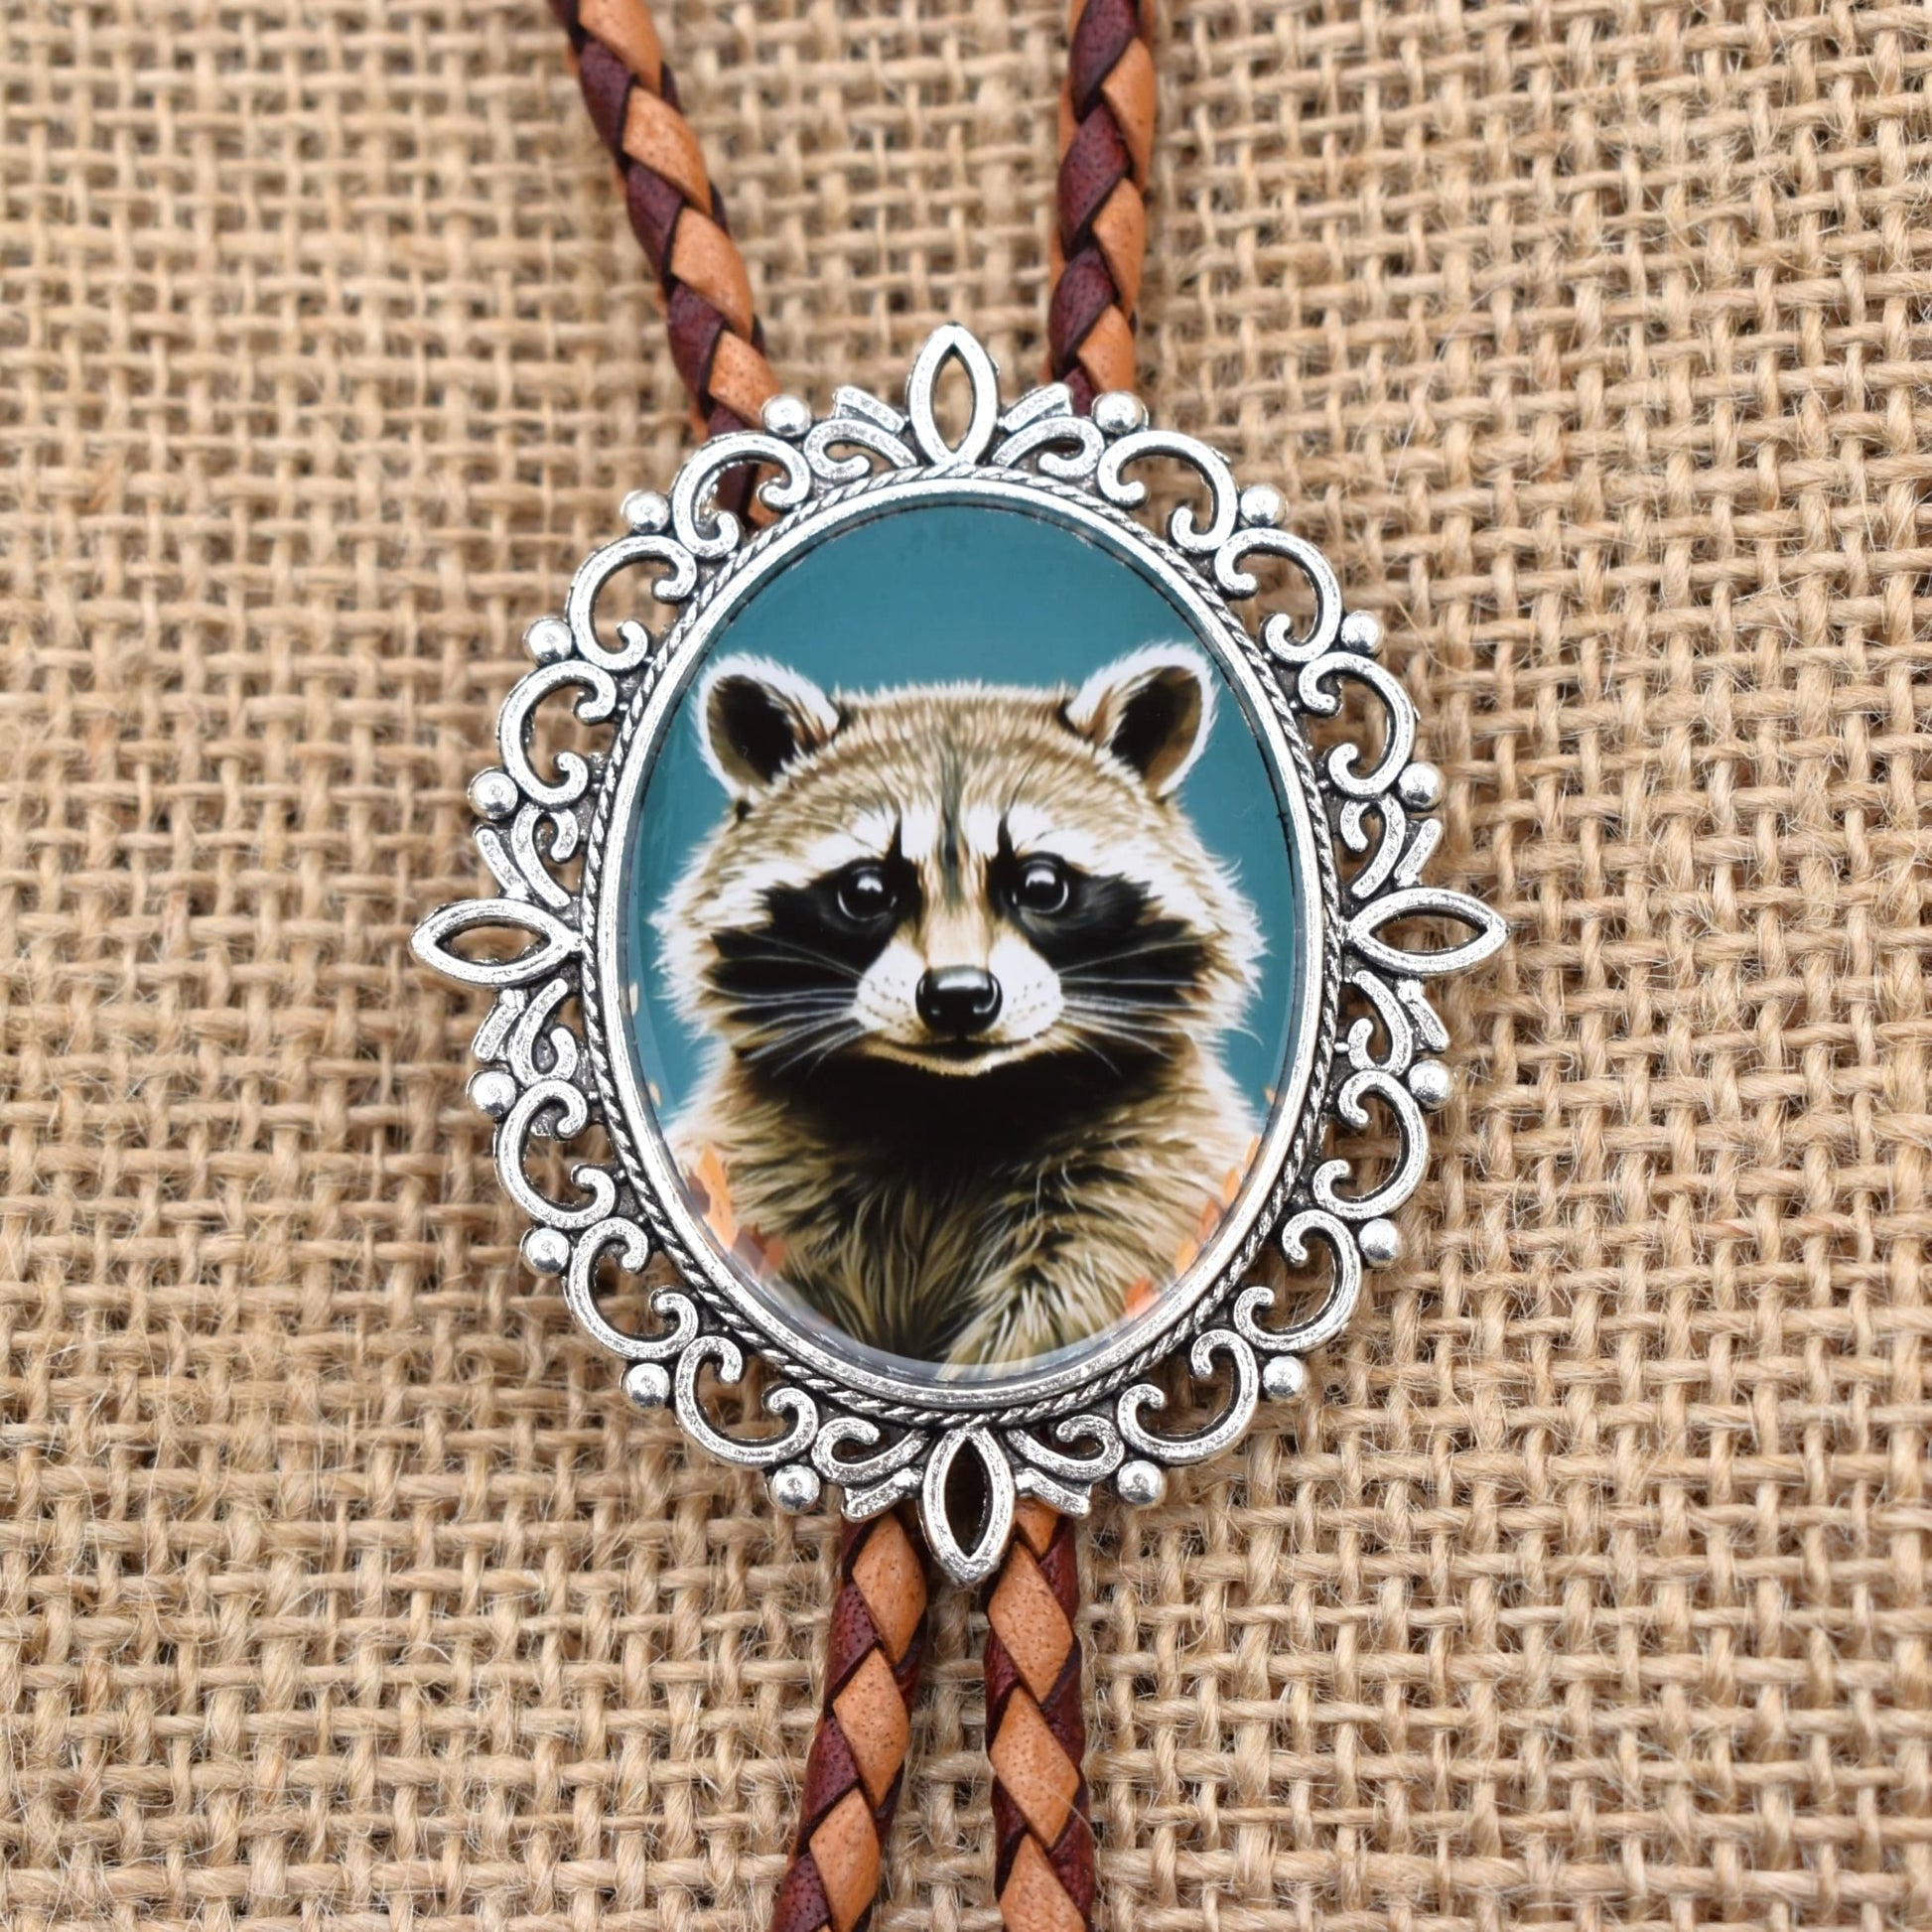 western wedding tie,bola string bolo tie,womens ladies bolo,custom personalized,black tie brown tie,trees woods forest,cute raccoon,cute bolo tie,raccoon belt buckle,raccoon bolo tie,bolo tie for woman,beyonce bolo tie,rabbit fox bolo